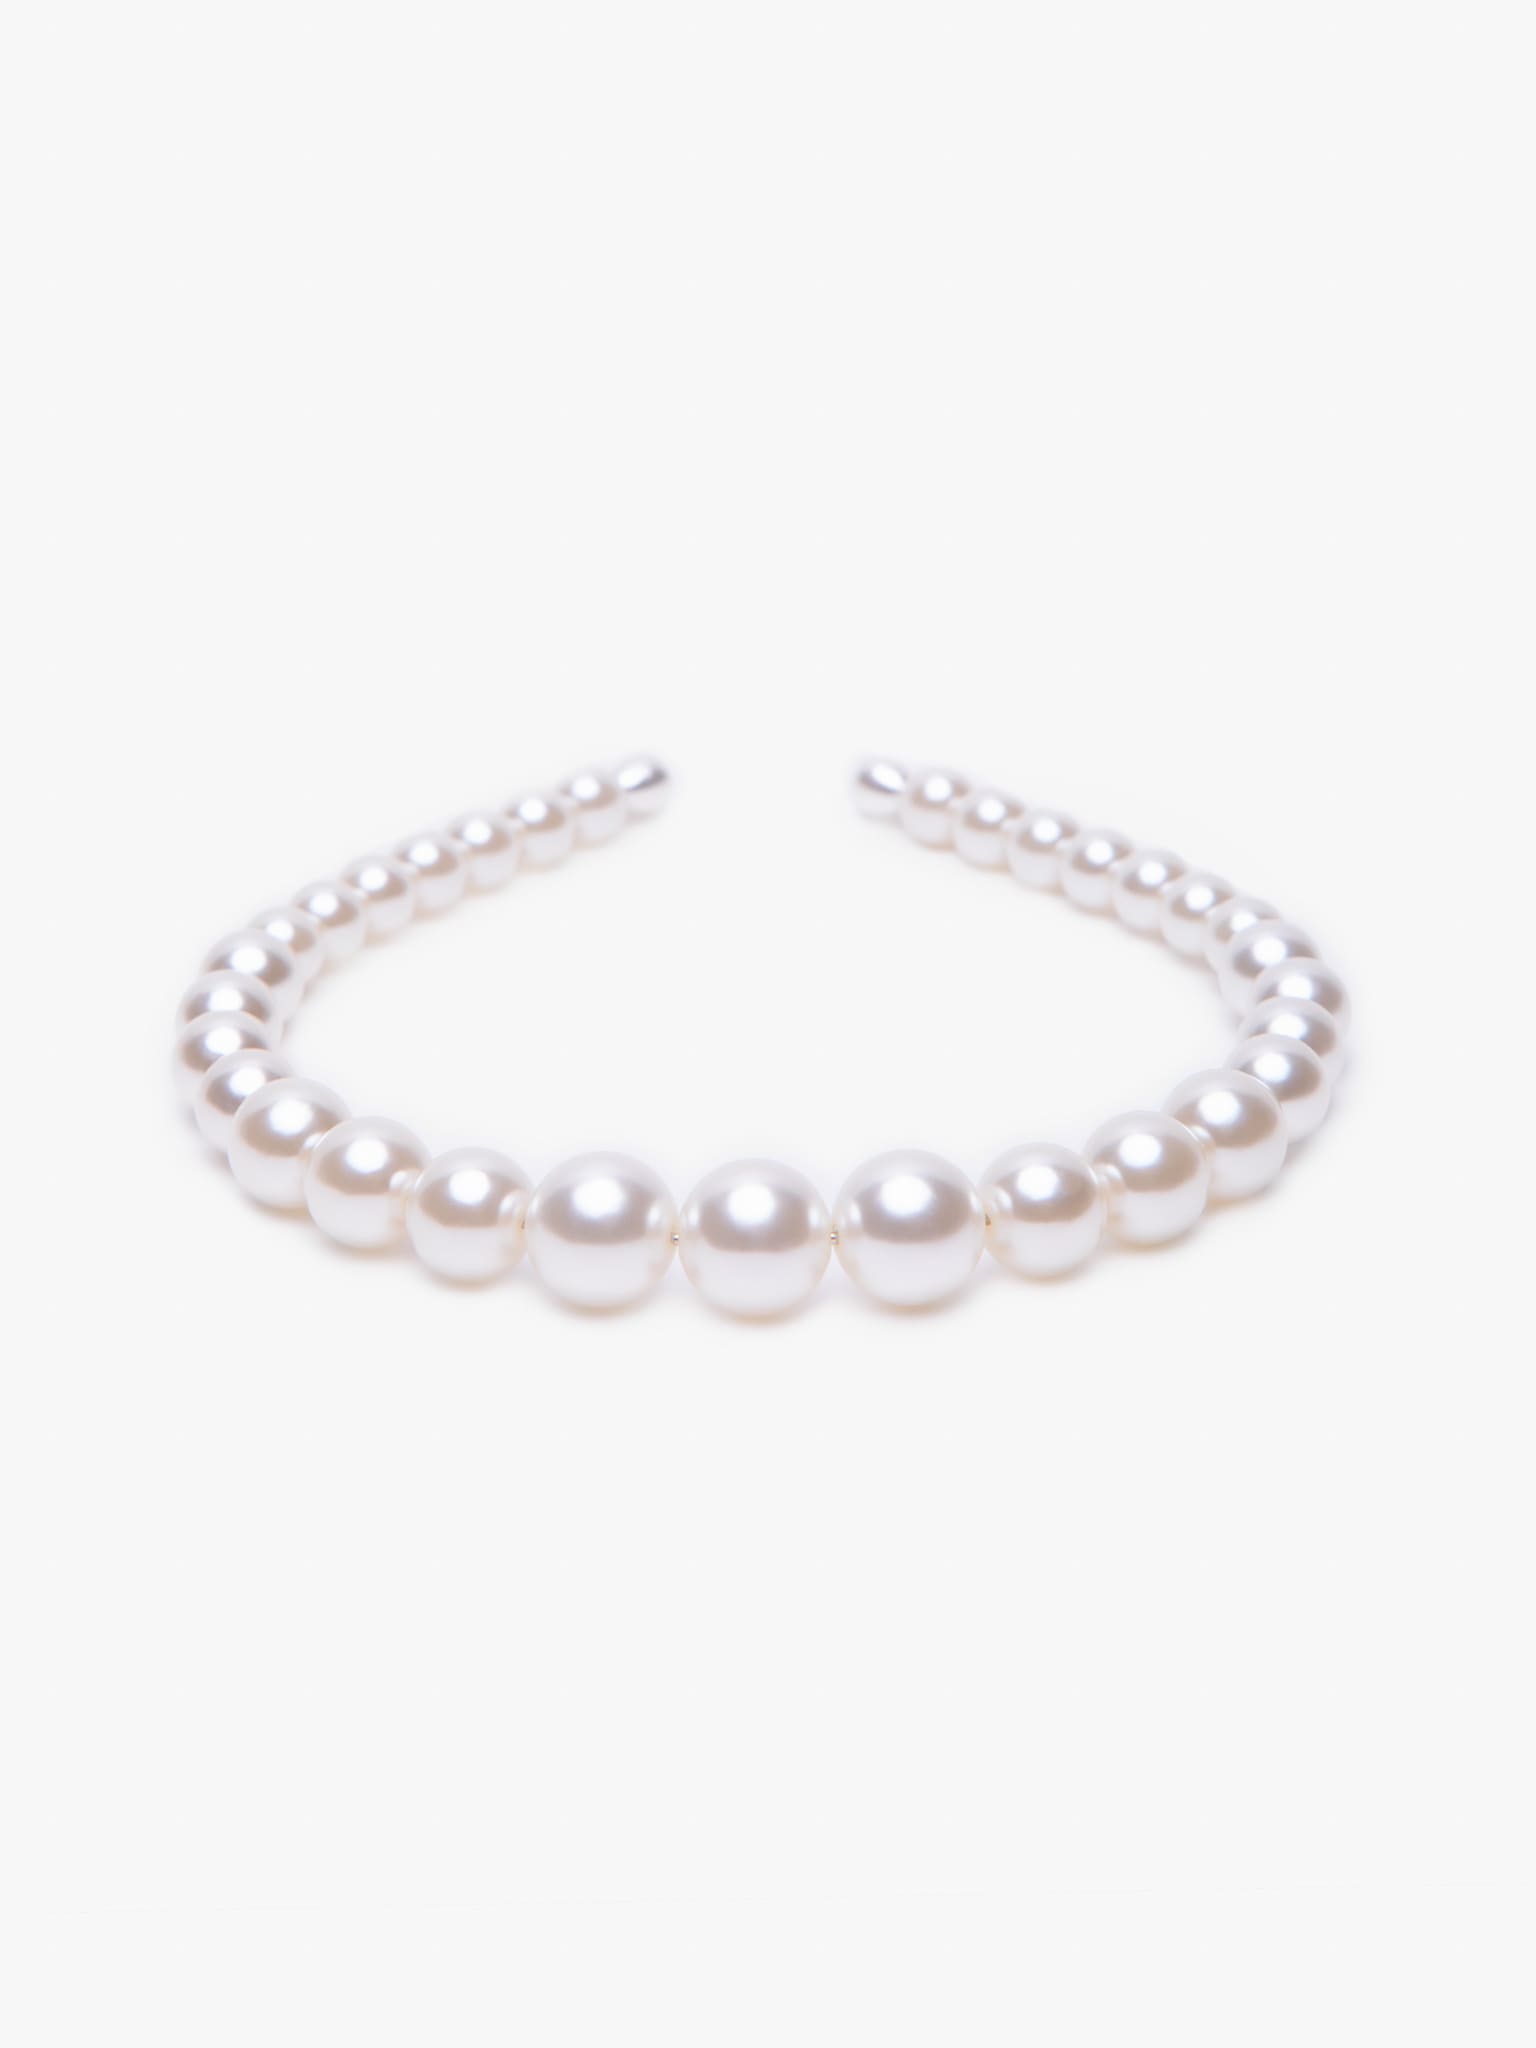 Coco Large Baroque Pearl Boltring Bracelet in 9ct Gold  The Jewel Shop